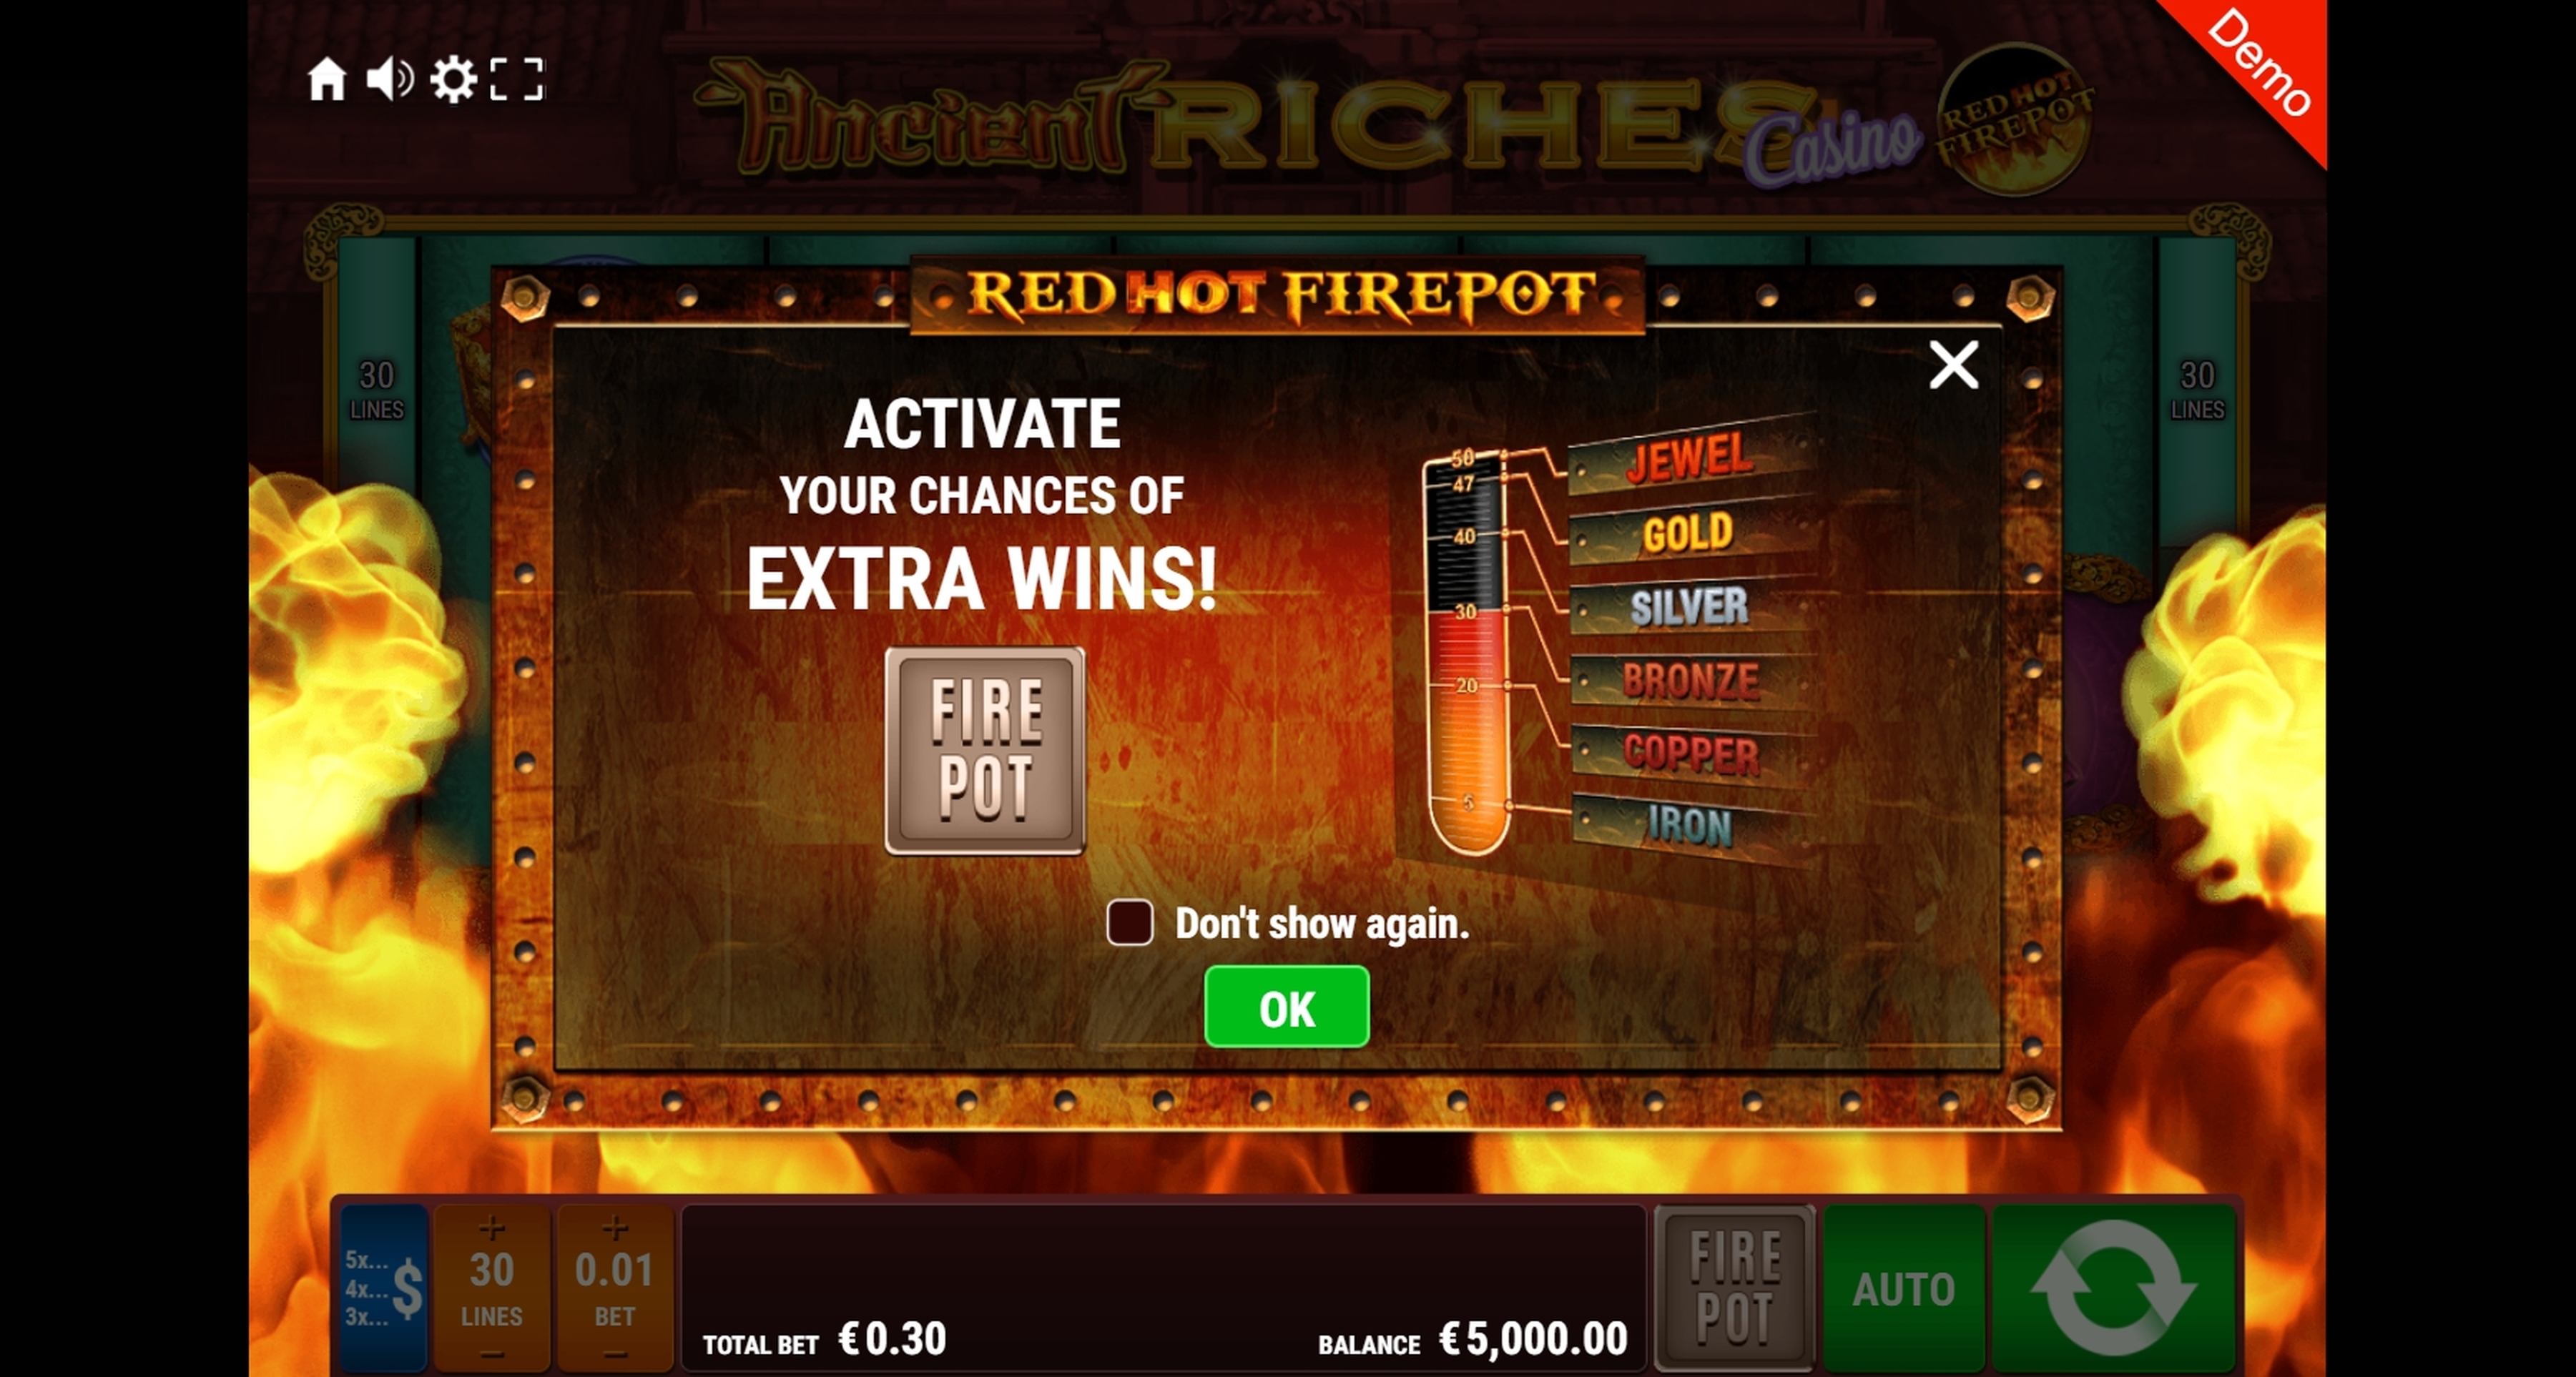 Play Ancient Riches RHFP Free Casino Slot Game by Gamomat